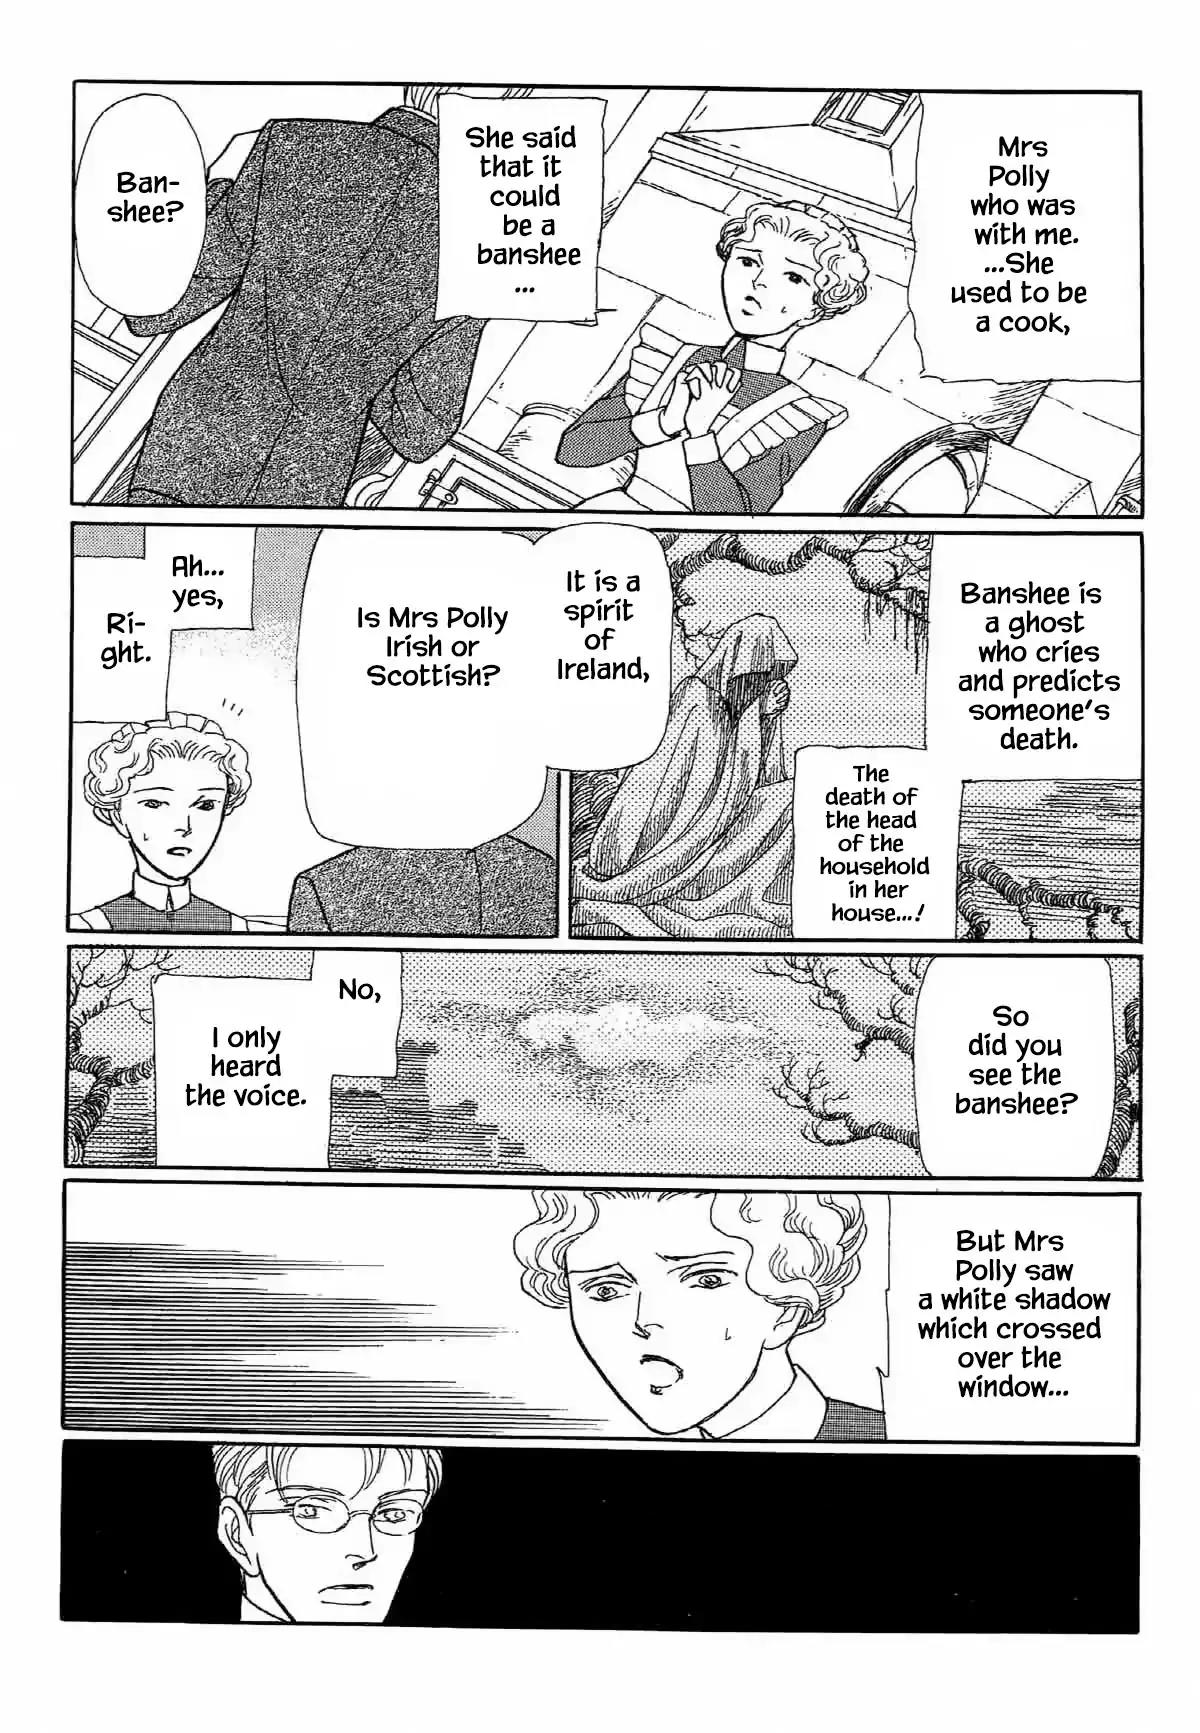 Beautiful England Series Vol.2 Chapter 13.2